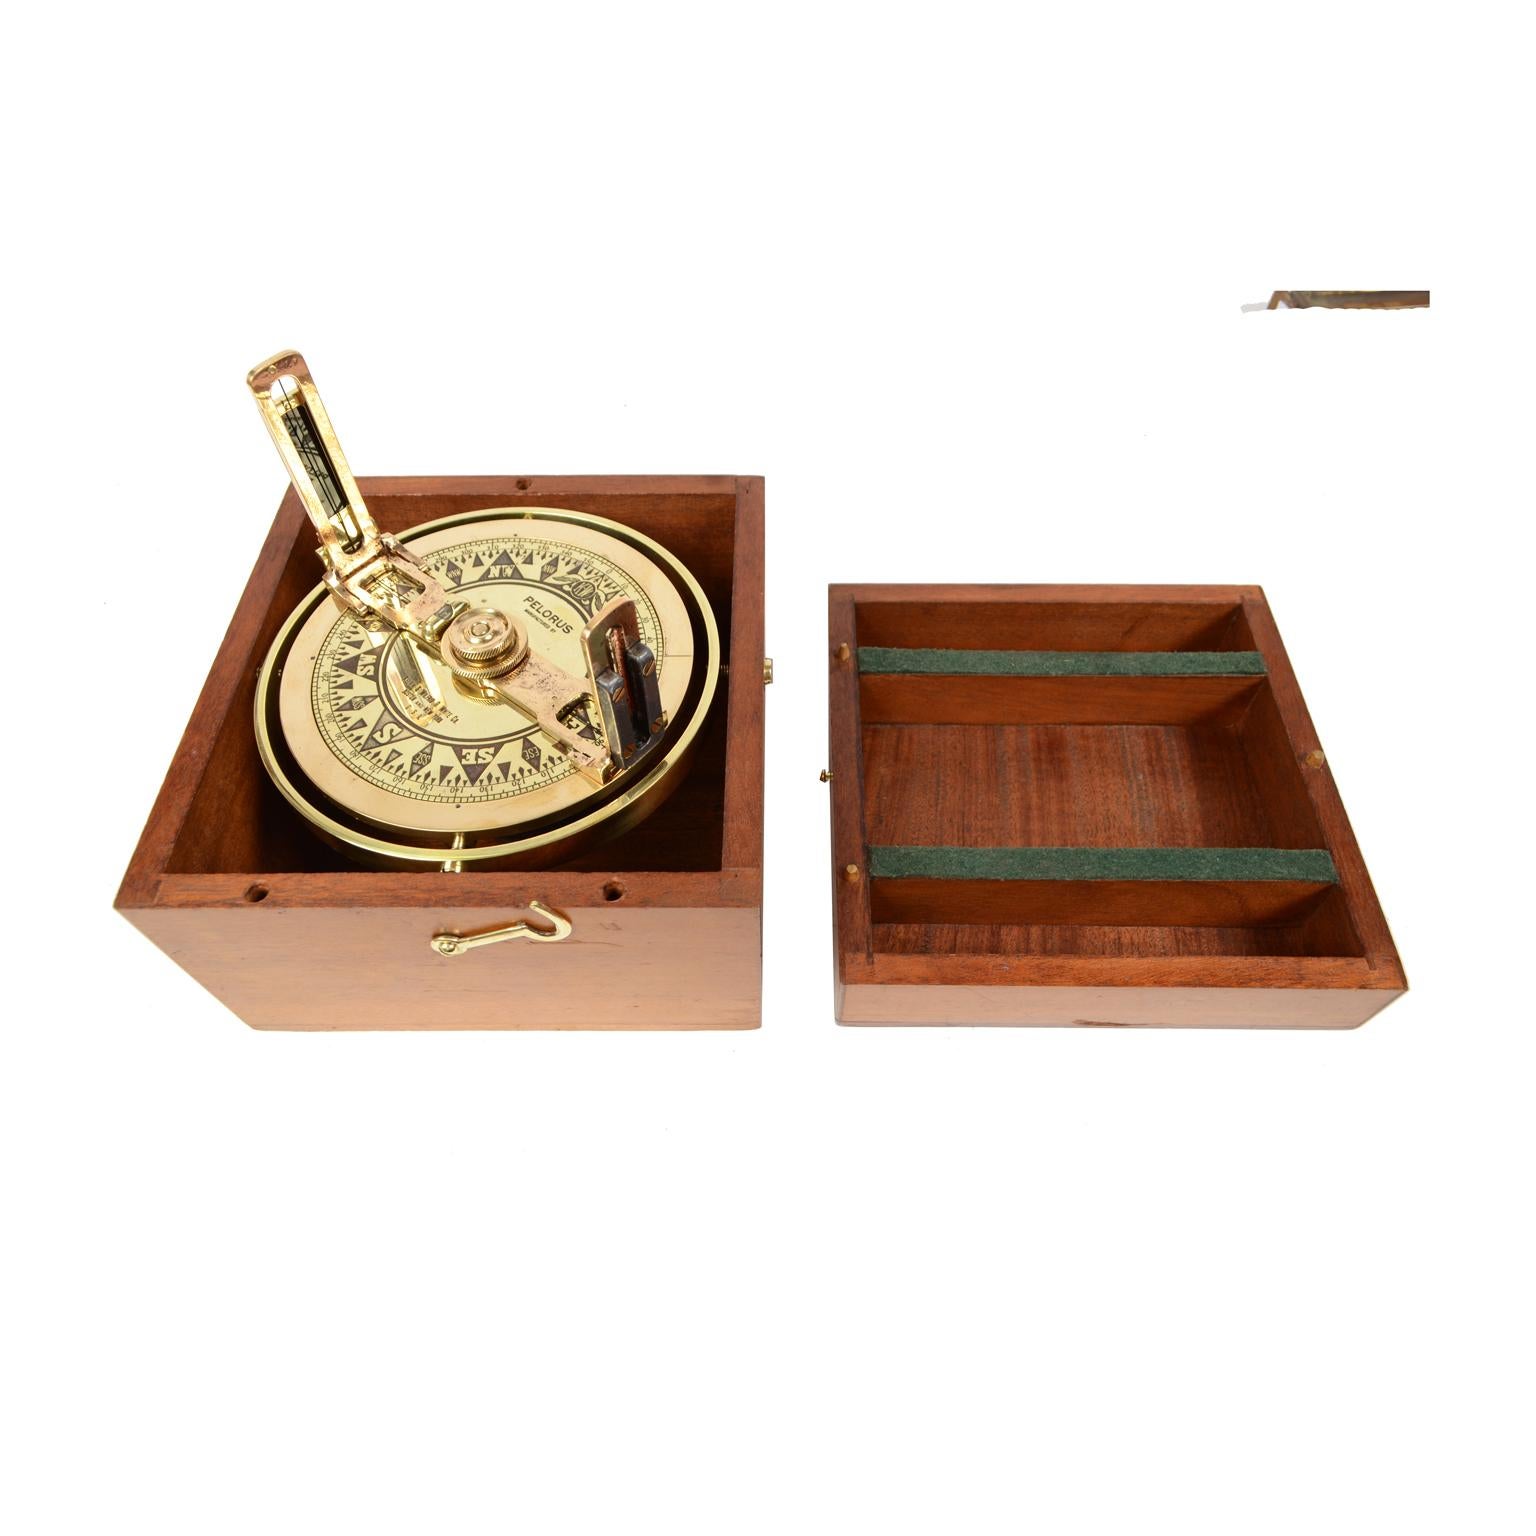 Pelorus made in 1920s of brass, signed Kelvin & Wilfrid O. White Co. Boston and New York complete with original mahogany box. It is an azimuth dial equipped with a compass used to determine the position of a ship during coastal navigation, the